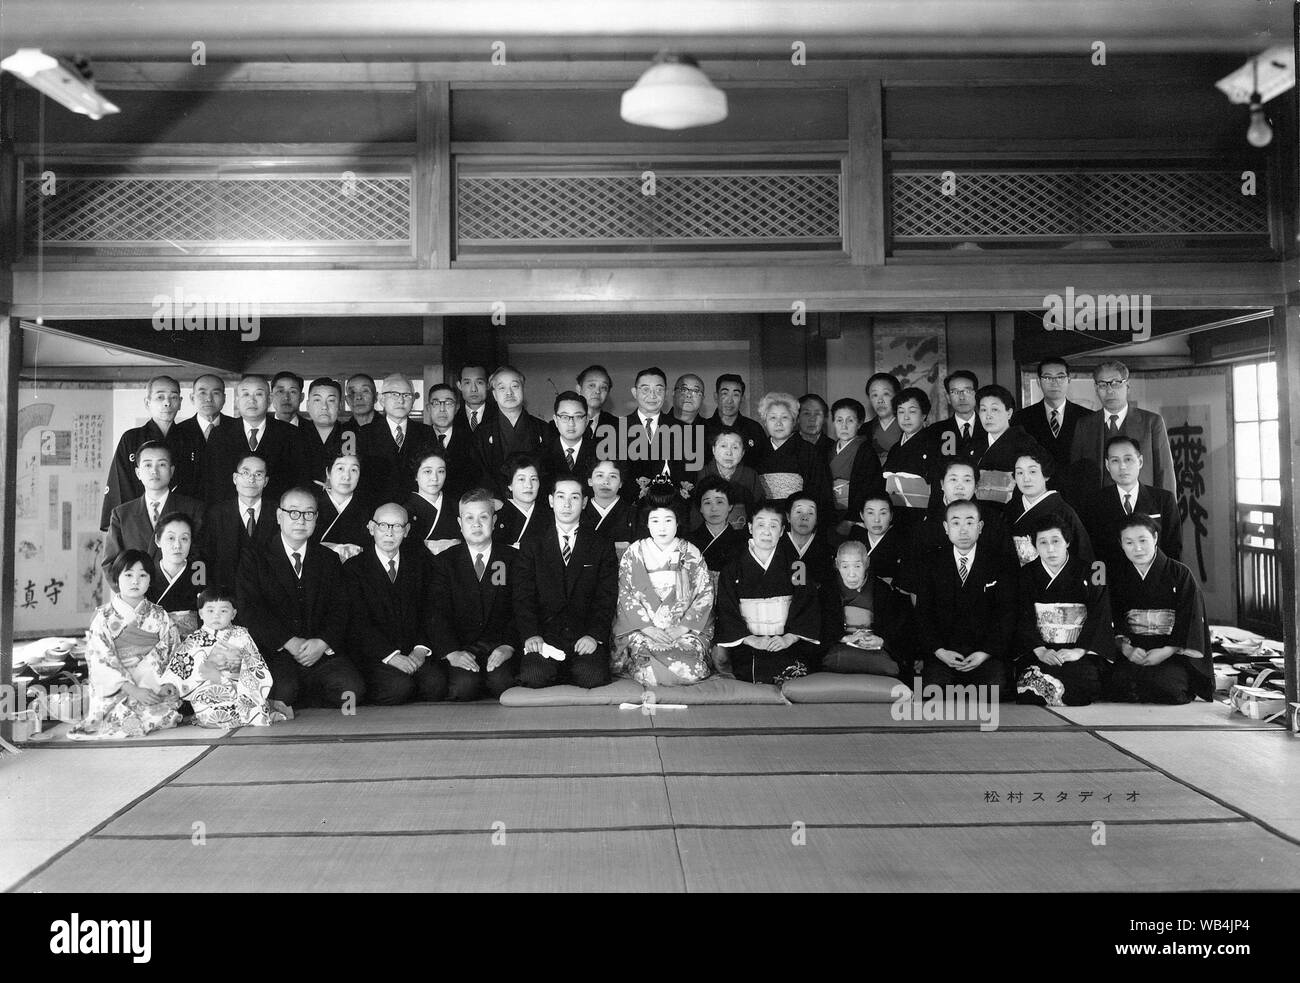 [ 1930s Japan - Group Portrait at Japanese Wedding ] —   Family group photo at a wedding. The majority of the men wear Western style suits, while all the women wear kimono.  By the 1920s, Japanese wedding customs had undergone a great transformation due to Western influences. This is clearly visible in this photo.  20th century vintage gelatin silver print. Stock Photo